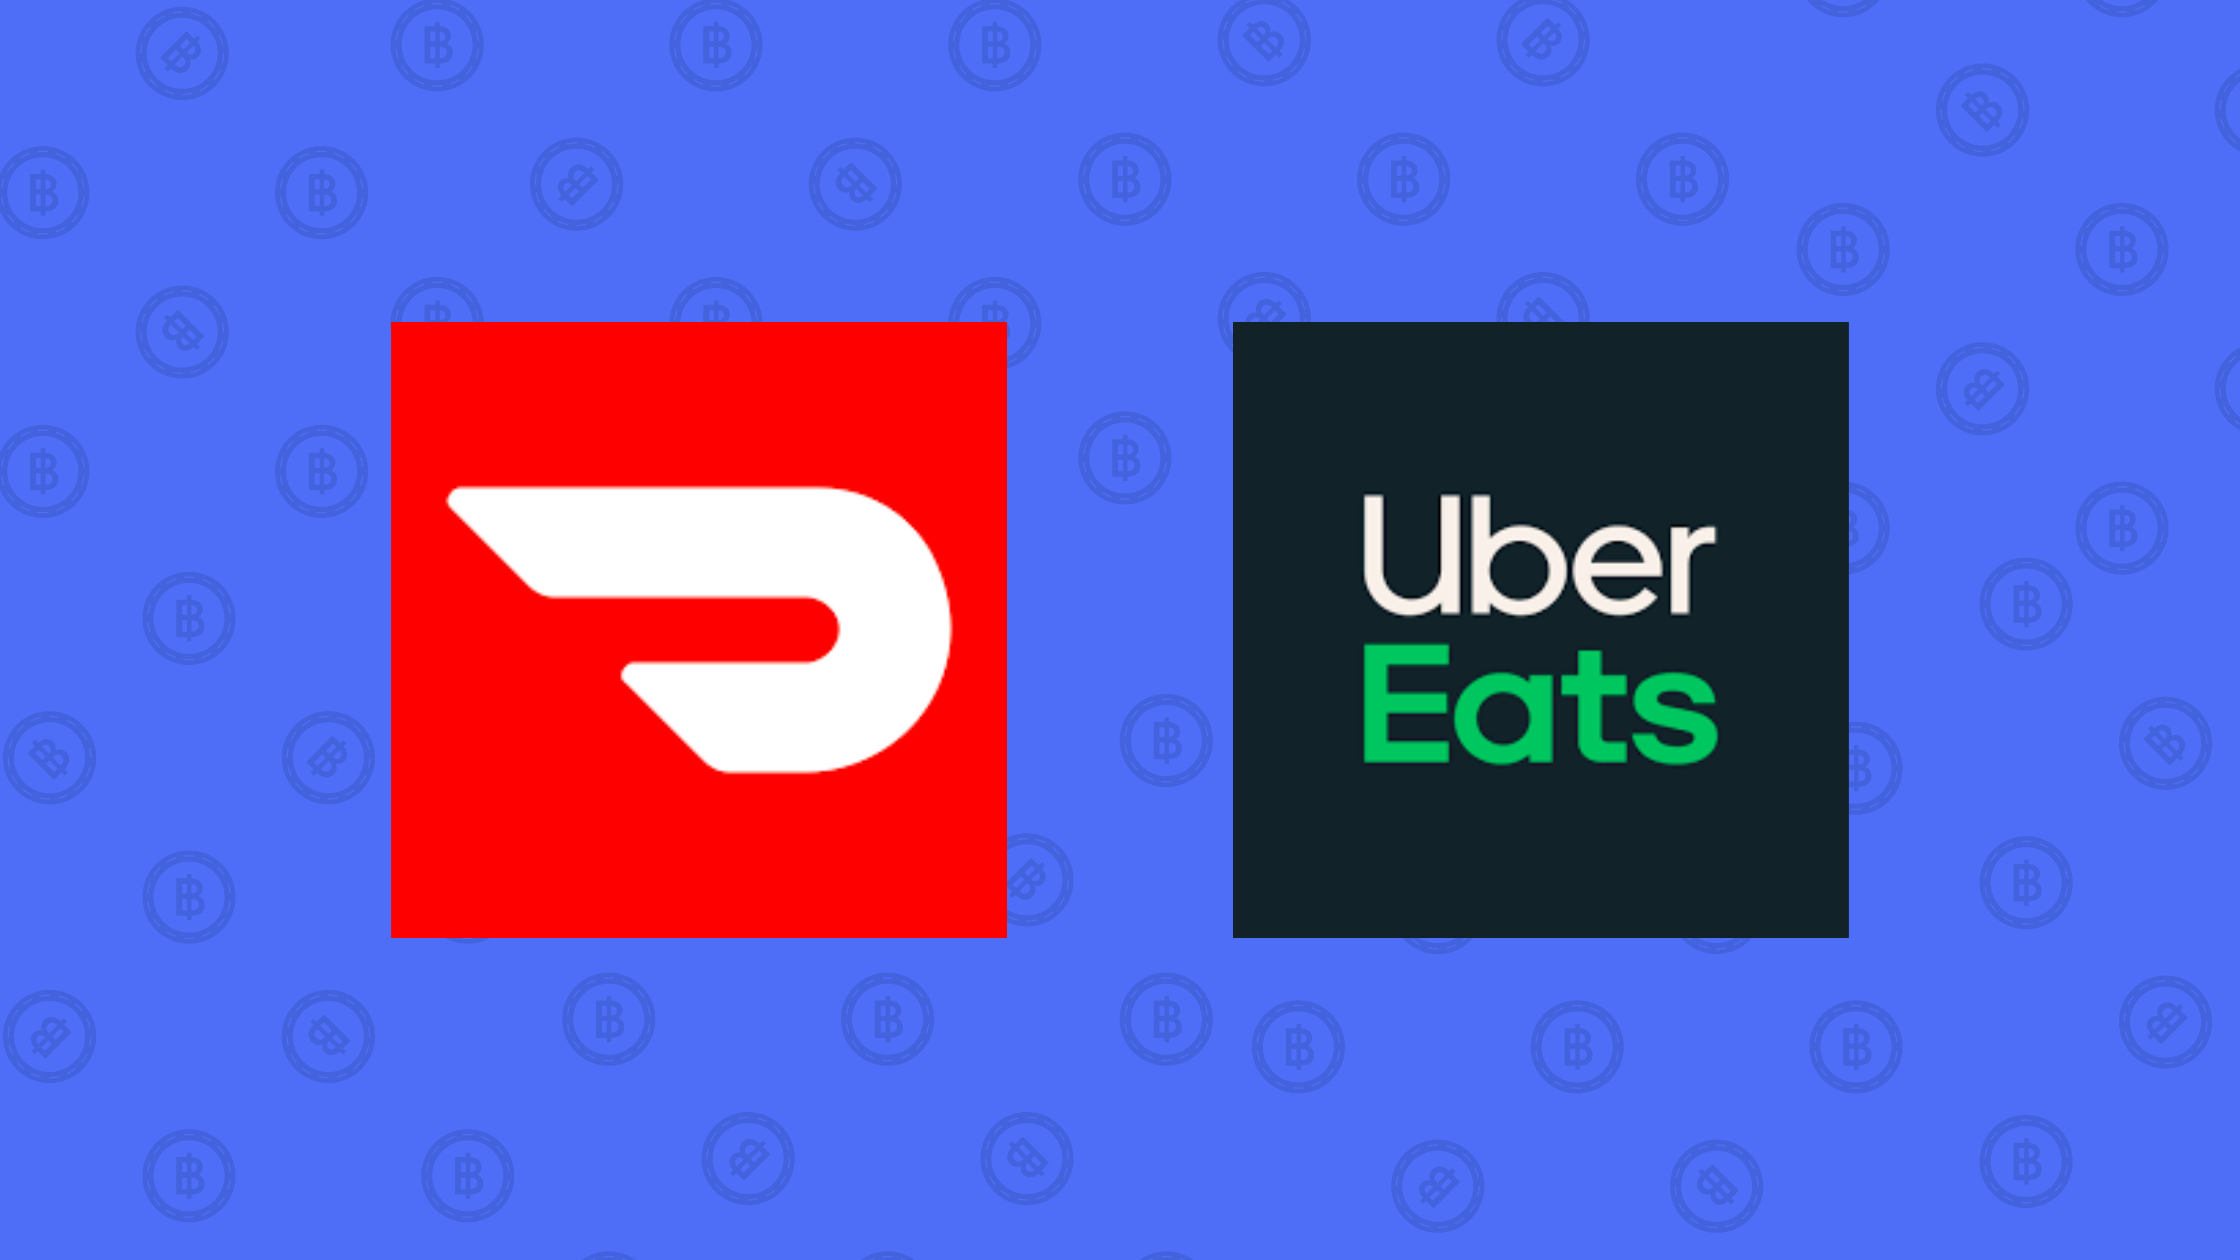 Pay for DoorDash & UberEats Food Delivery with Bitcoin